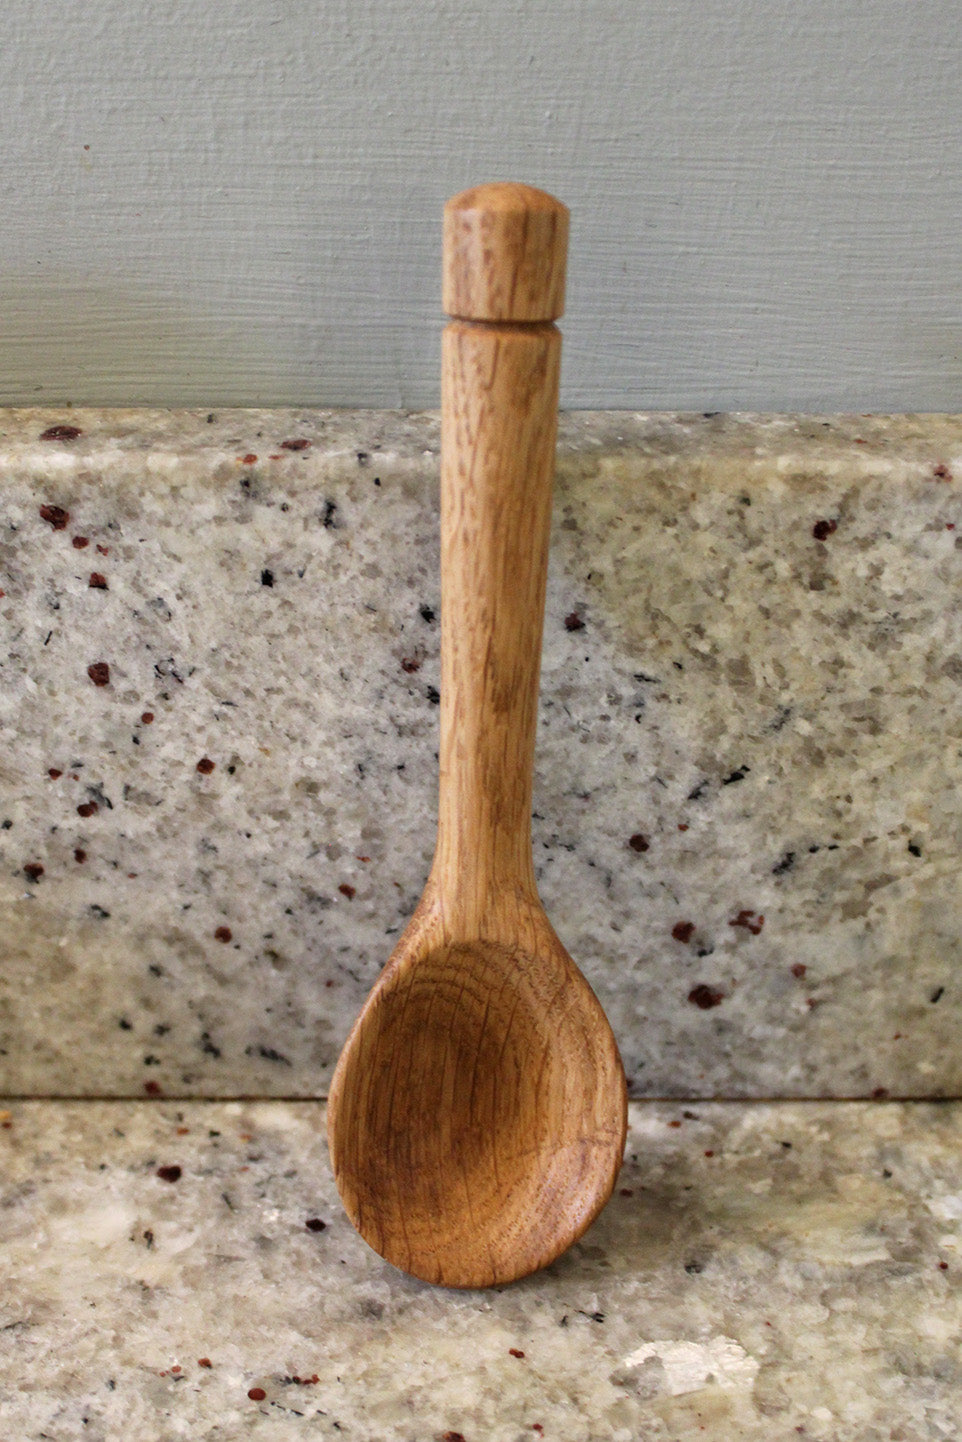  Spice spoon hand carved from Oak, in Fife. Scottish Textiles Showcase